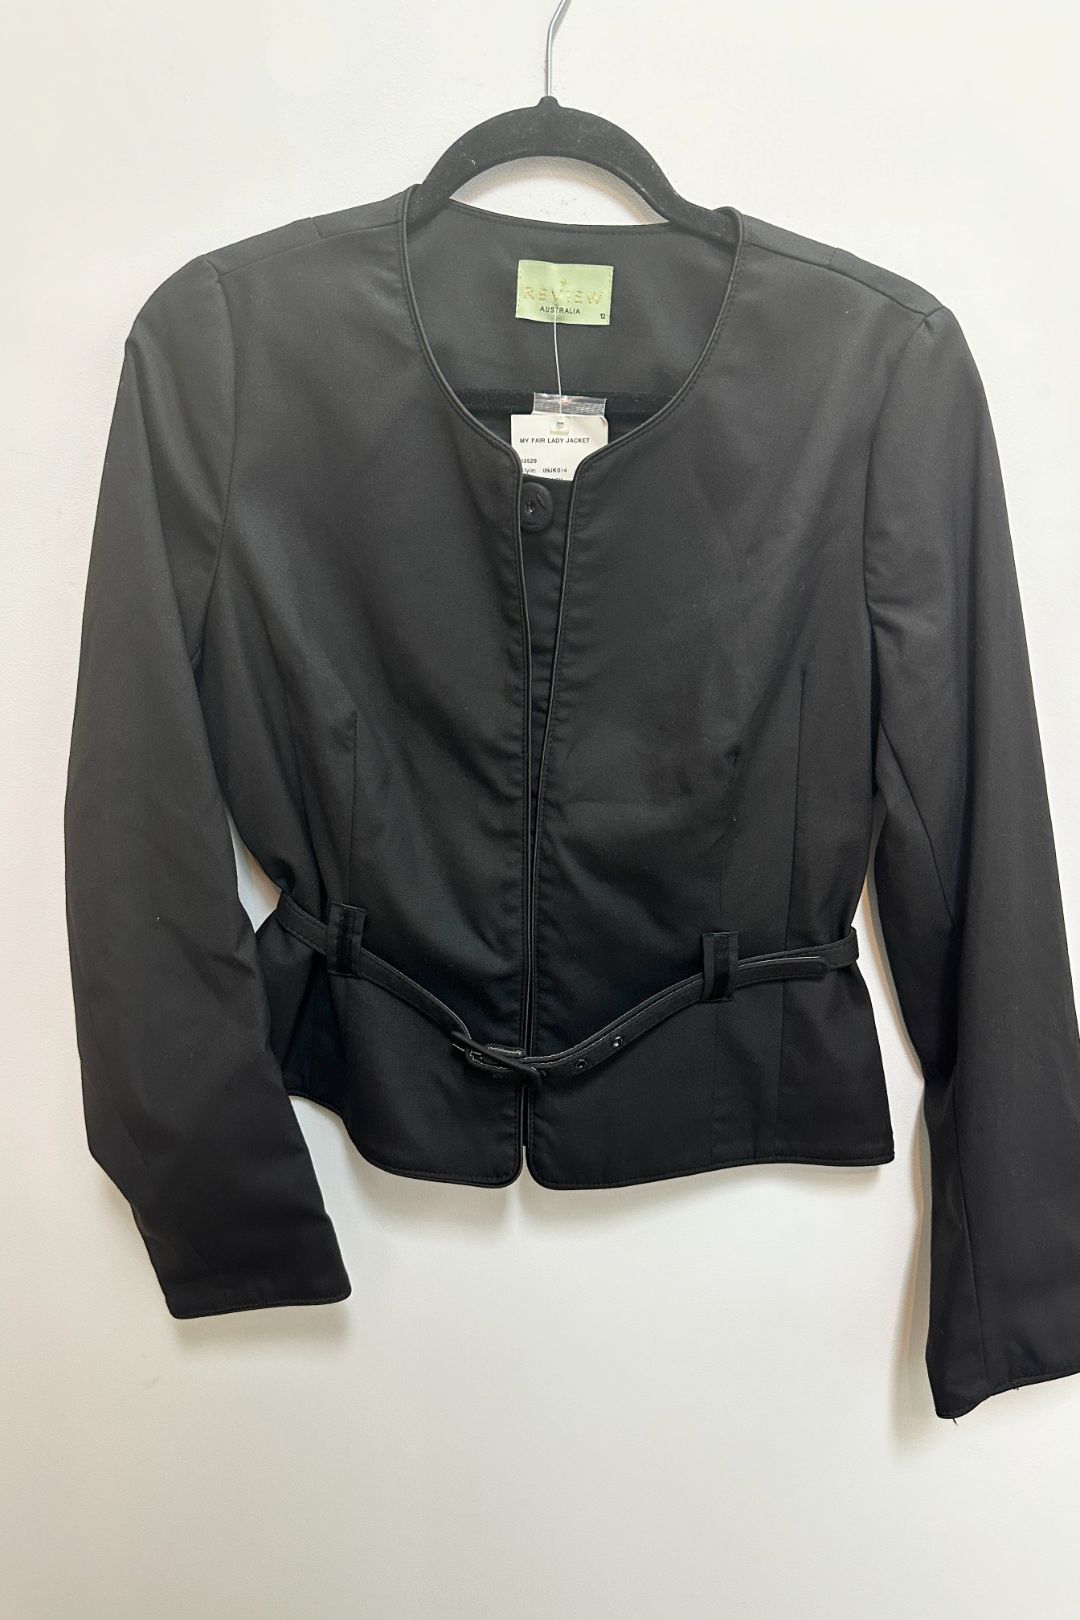 Review My Fair Lady Cropped Black Jacket